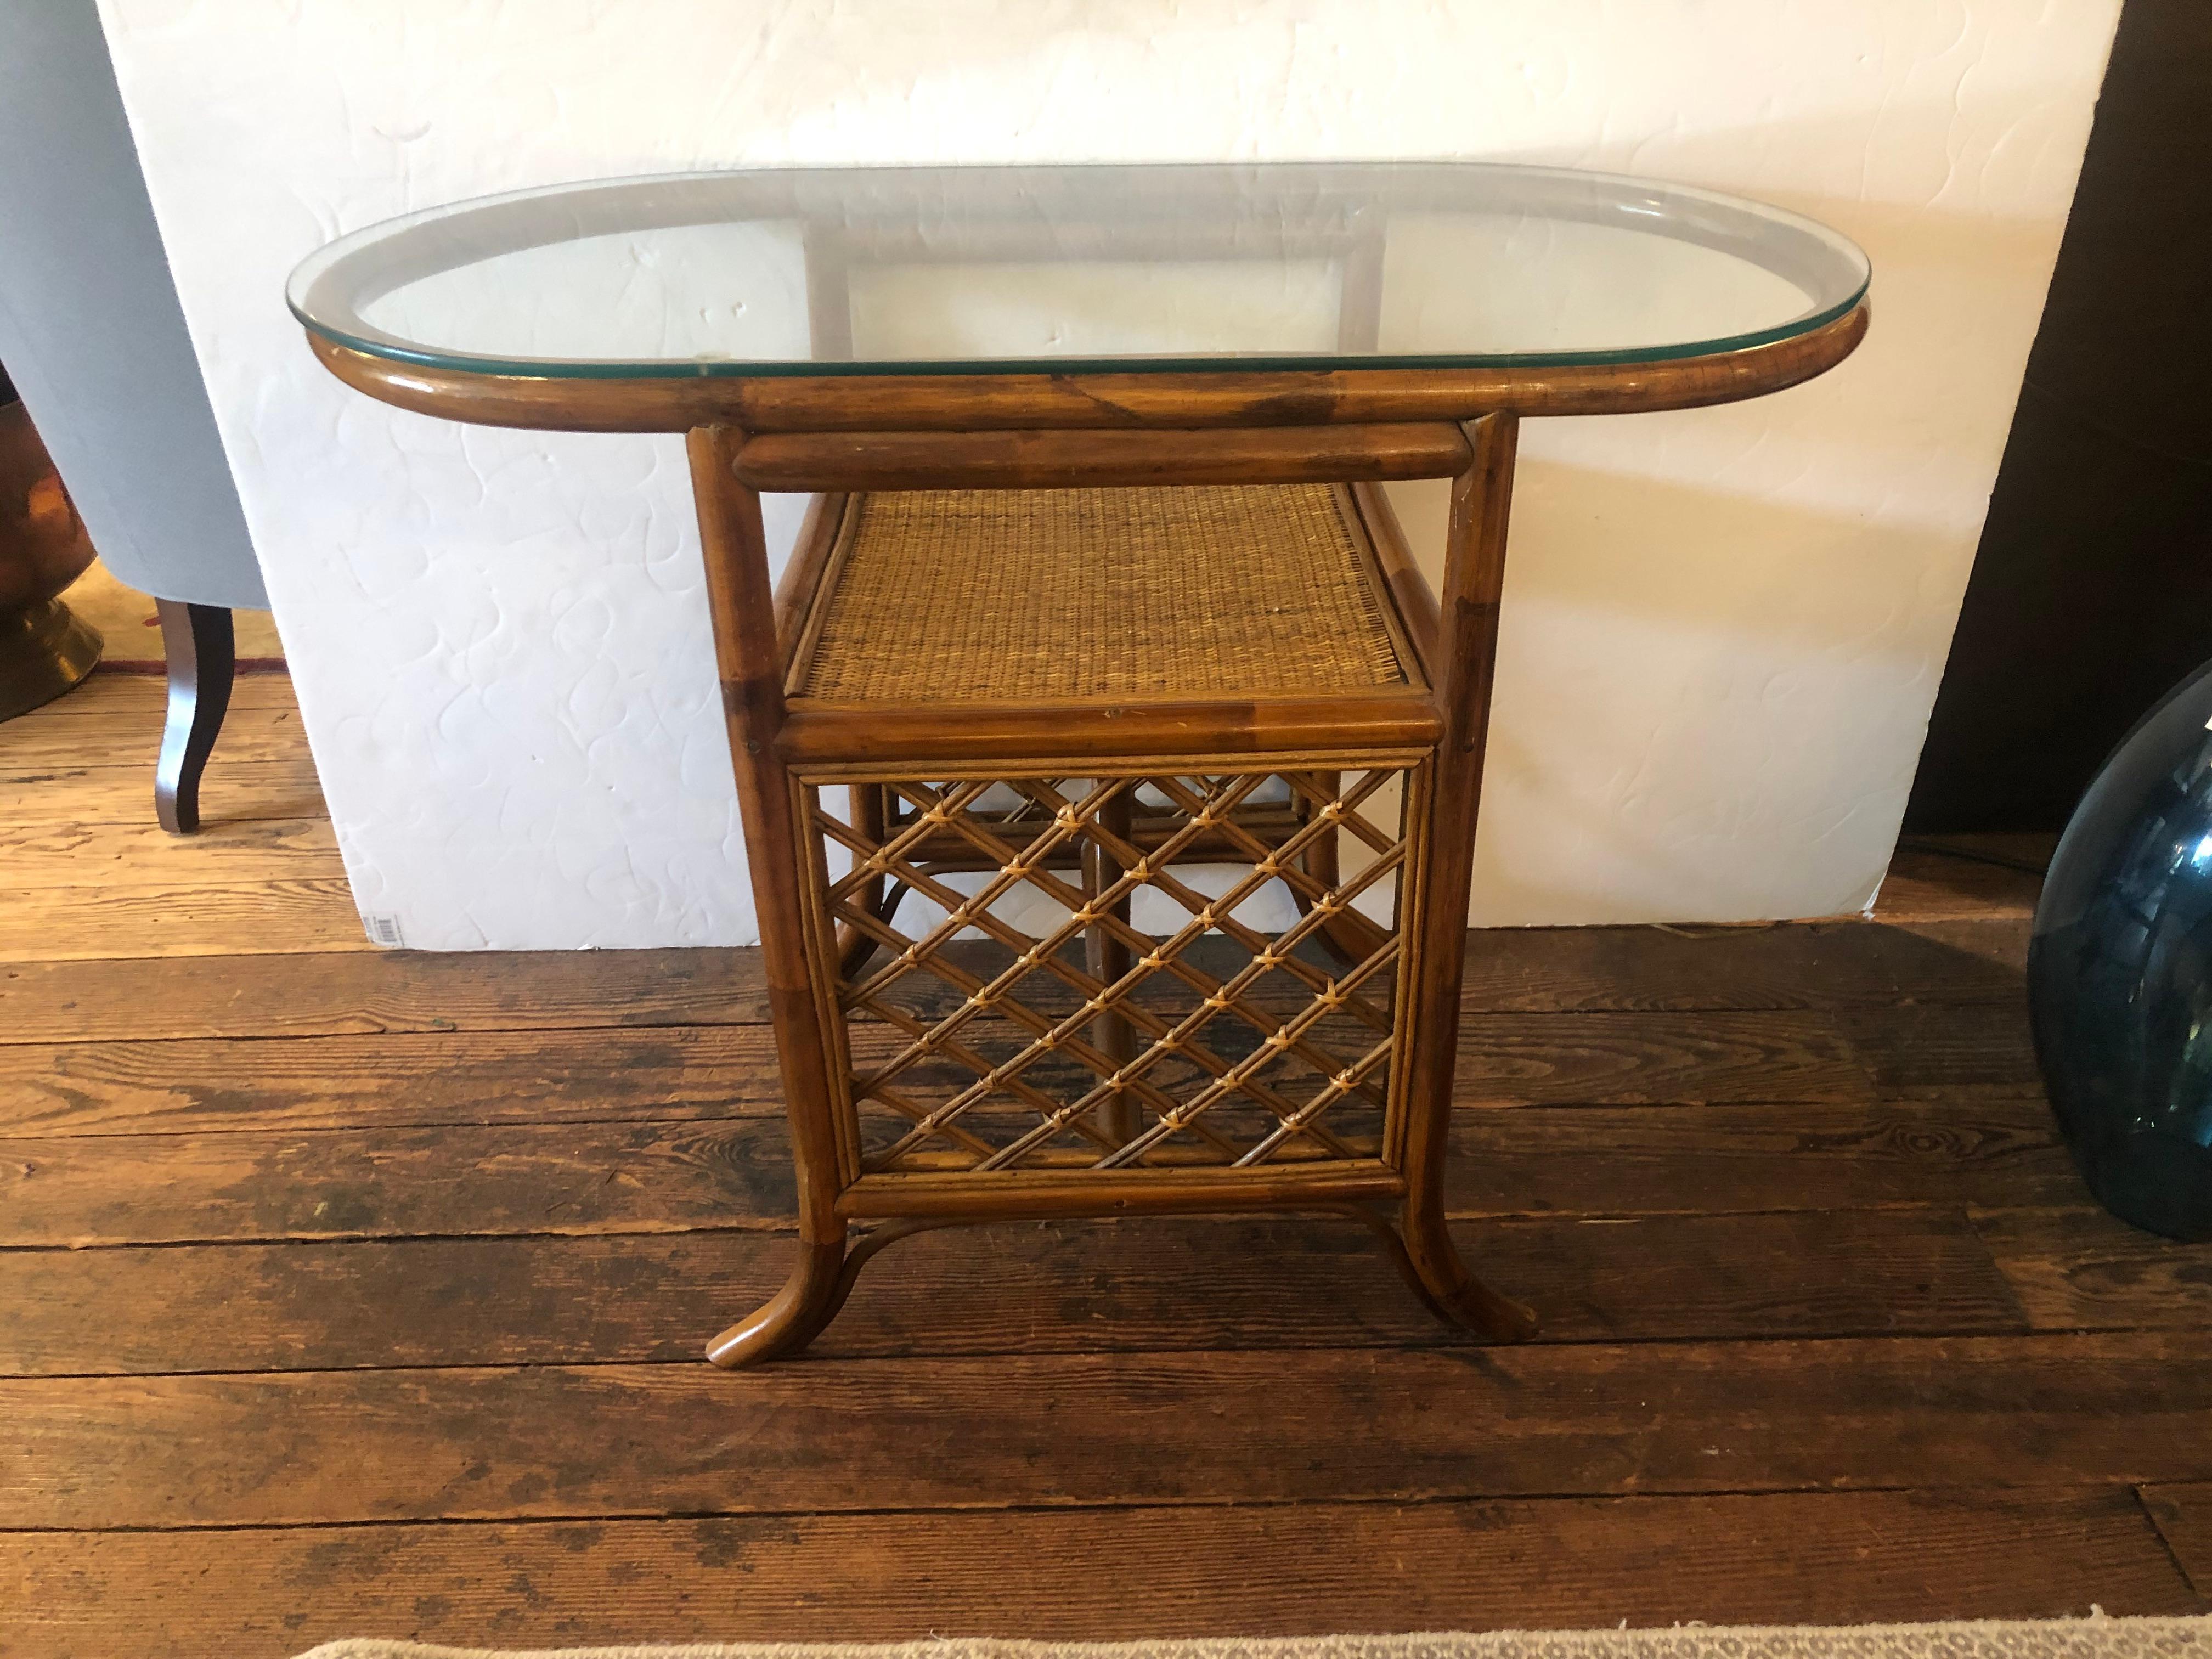 A rare and chic 3 piece rattan and bamboo set including two tier oblong console table and matching diminutive curved side chairs. Each has stylishly splayed legs and handsome hatchwork design. The bottom tier of the console is caned, while the top